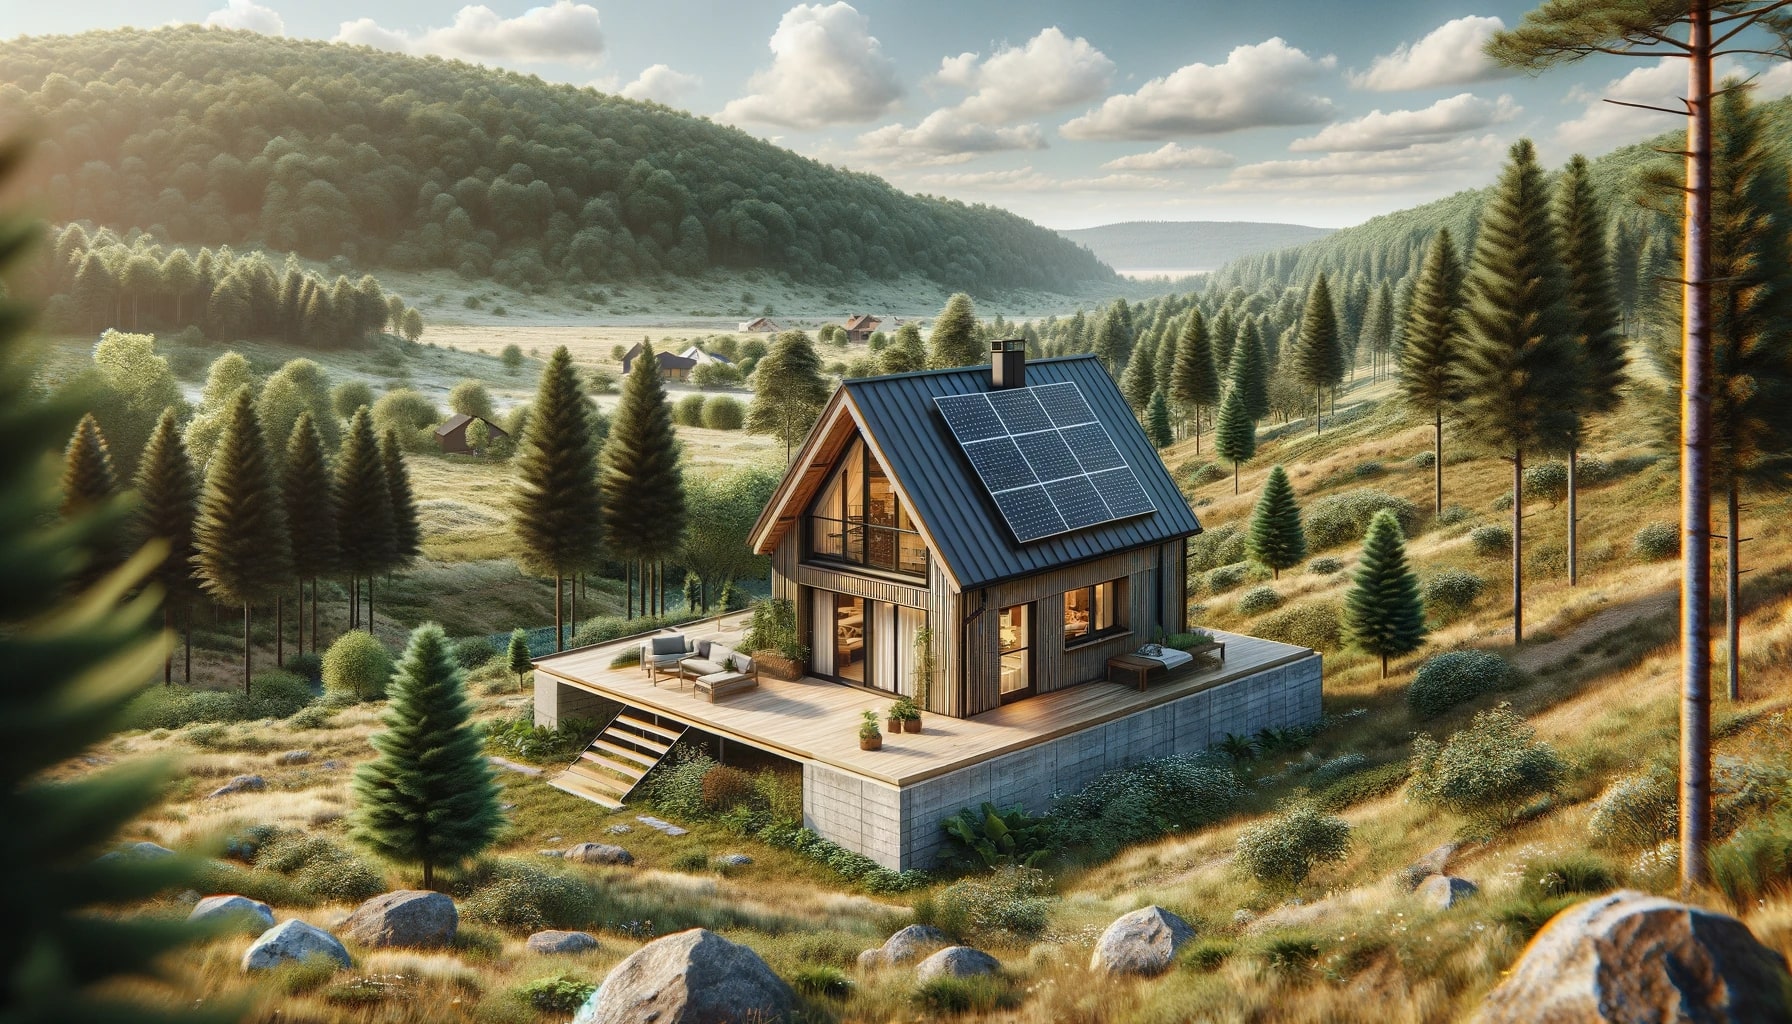 3d rendering of a green tiny house in the mountains.